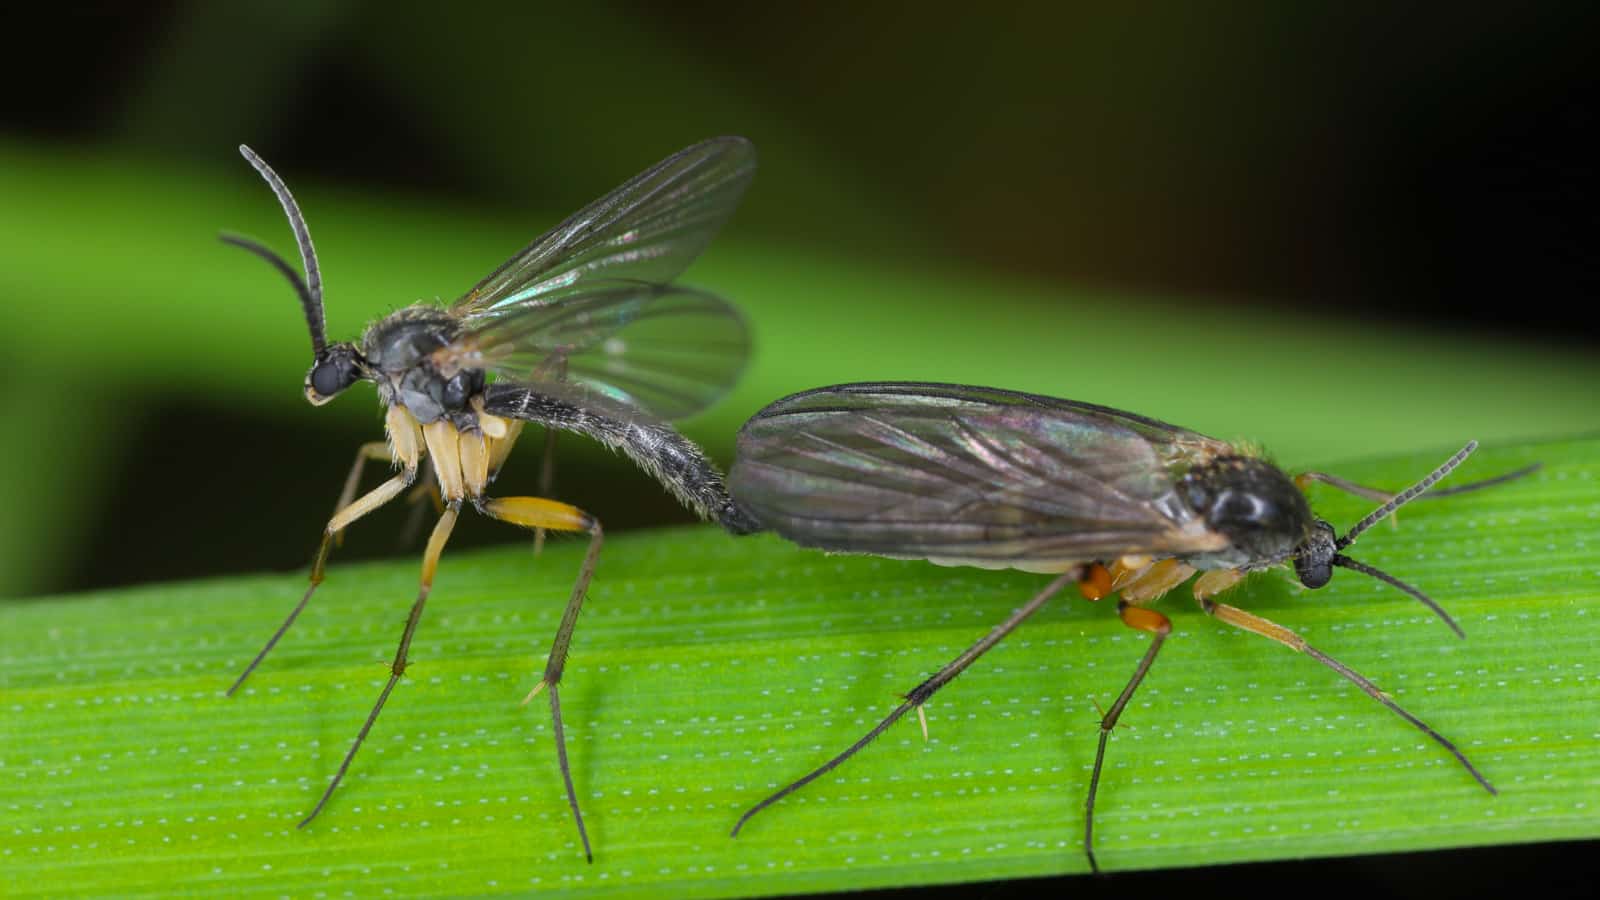 Dark-winged fungus gnat (Sciaridae sp), fauna of the soil, insects in the process of copulating